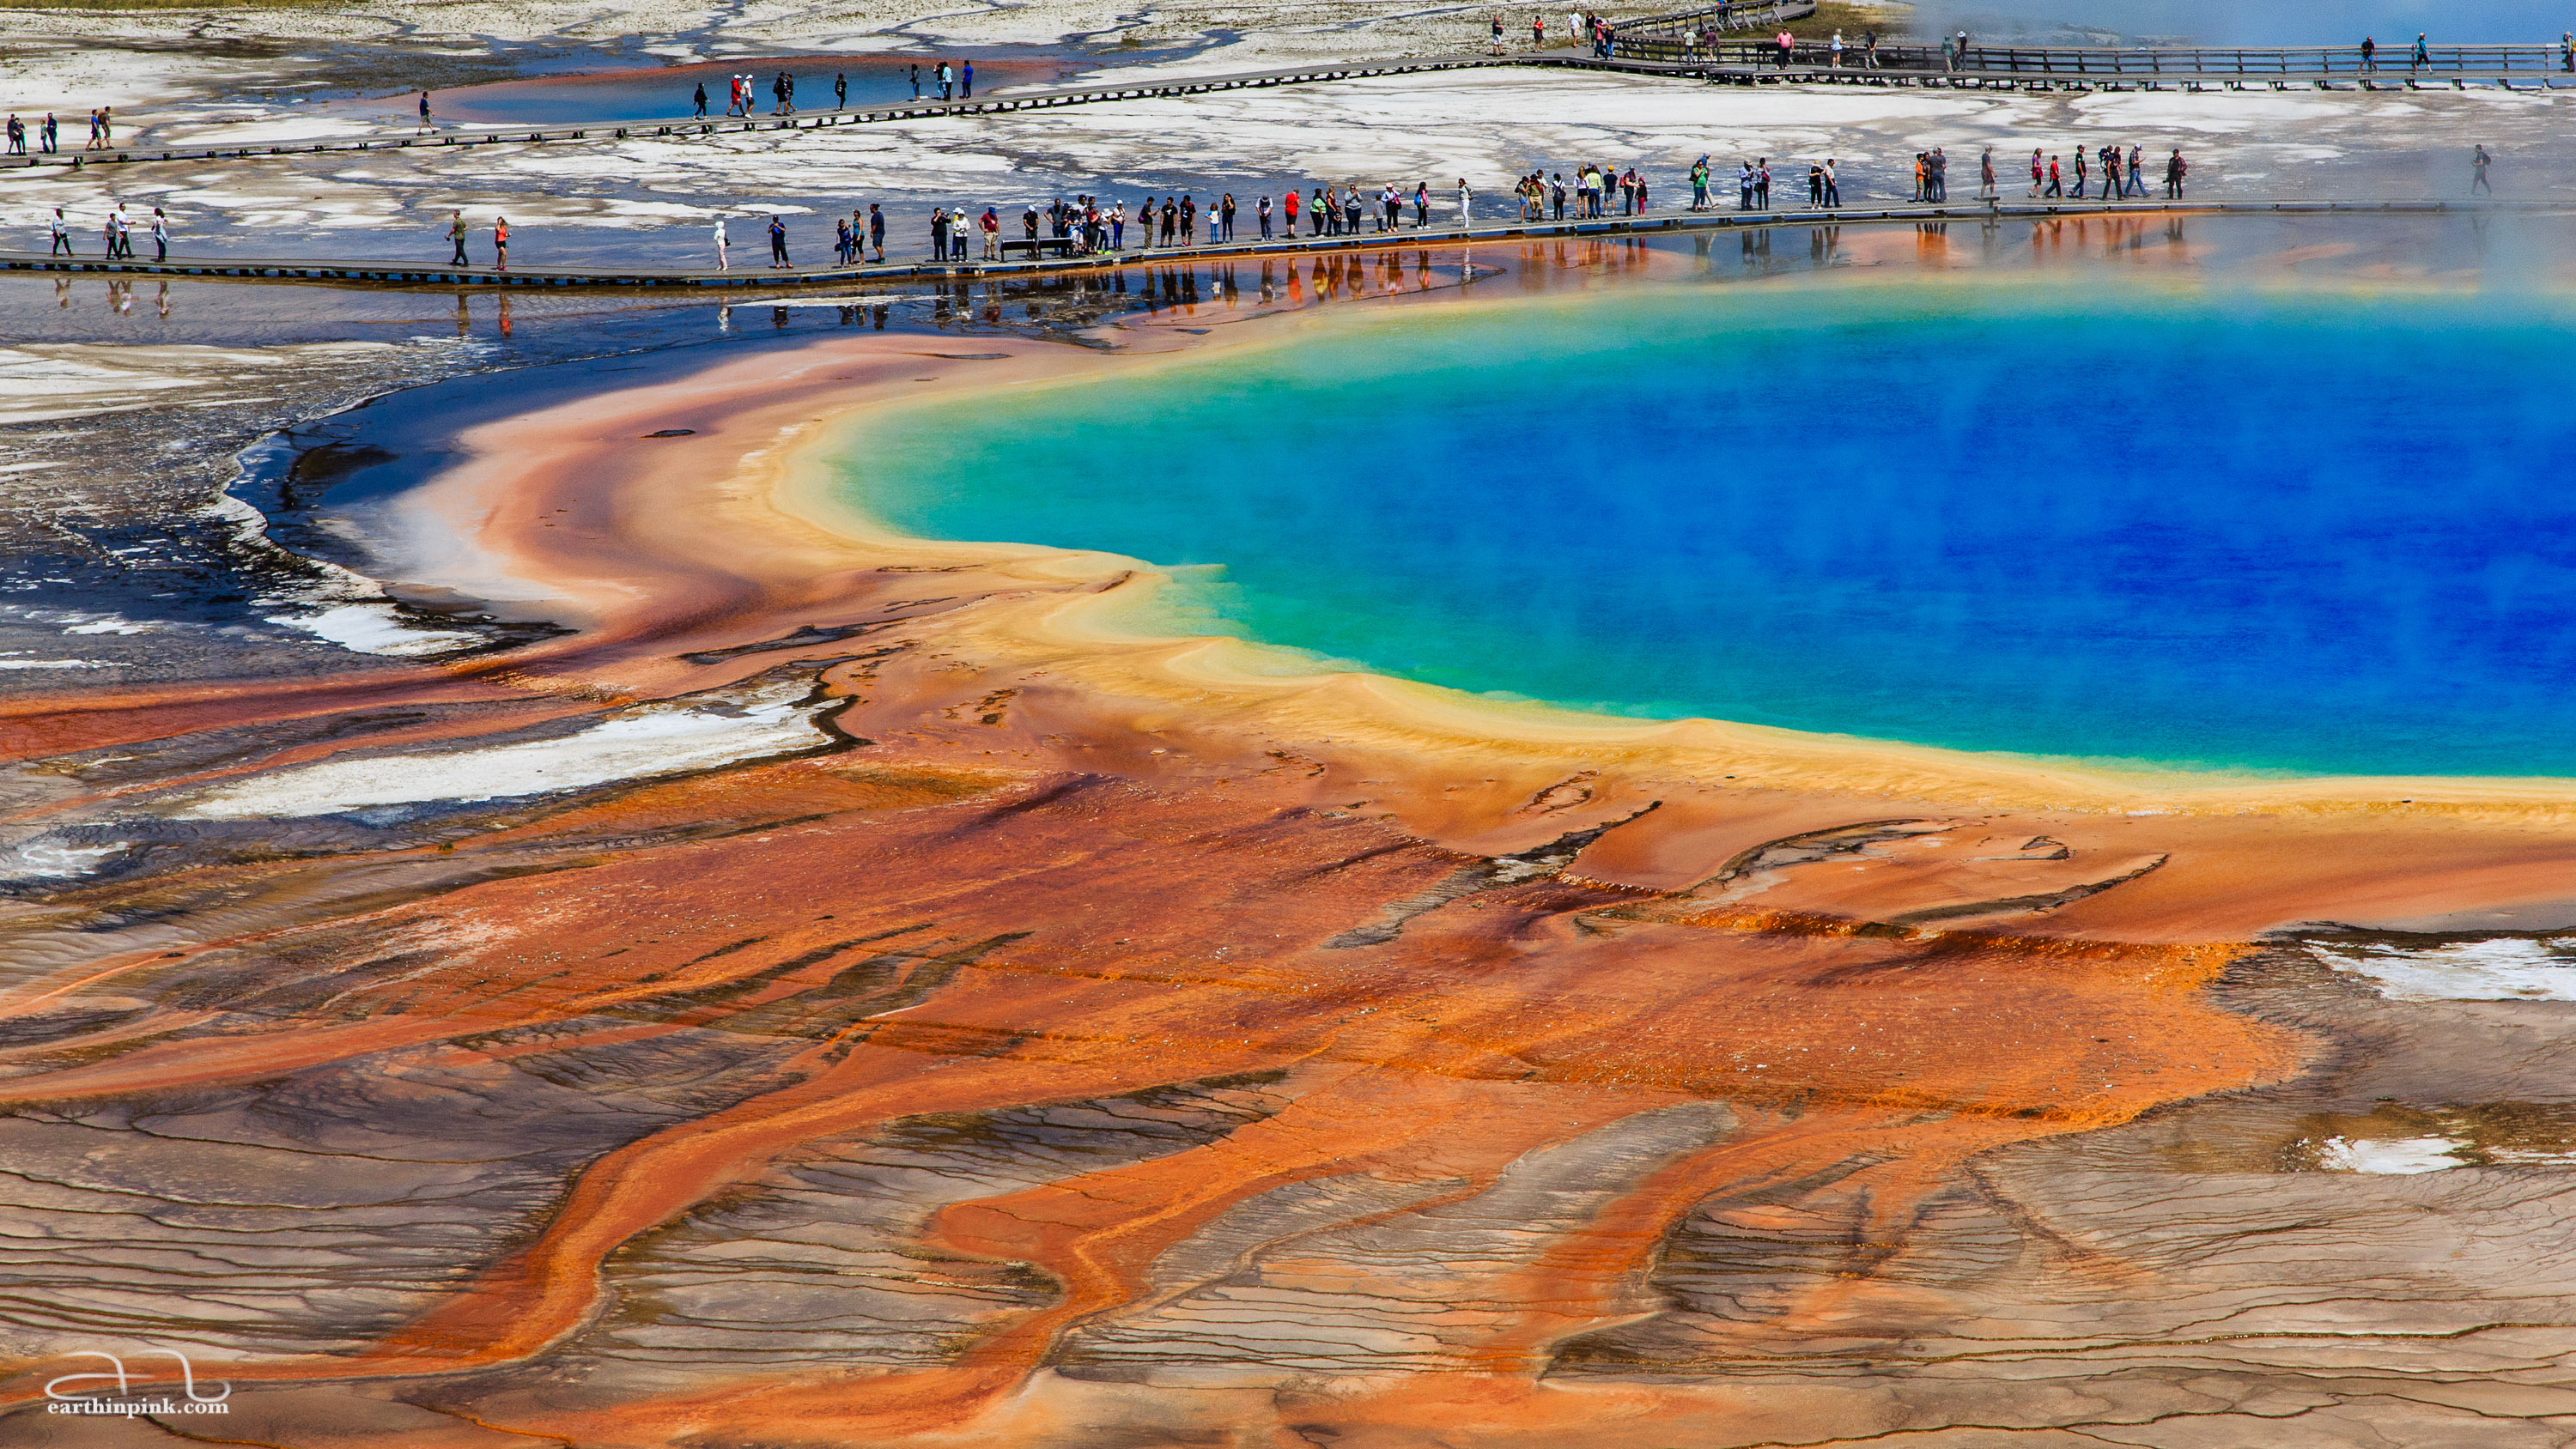 Yellowstone's Grand Prismatic Spring seen from the outlook point off of the Fairy Meadows trail.